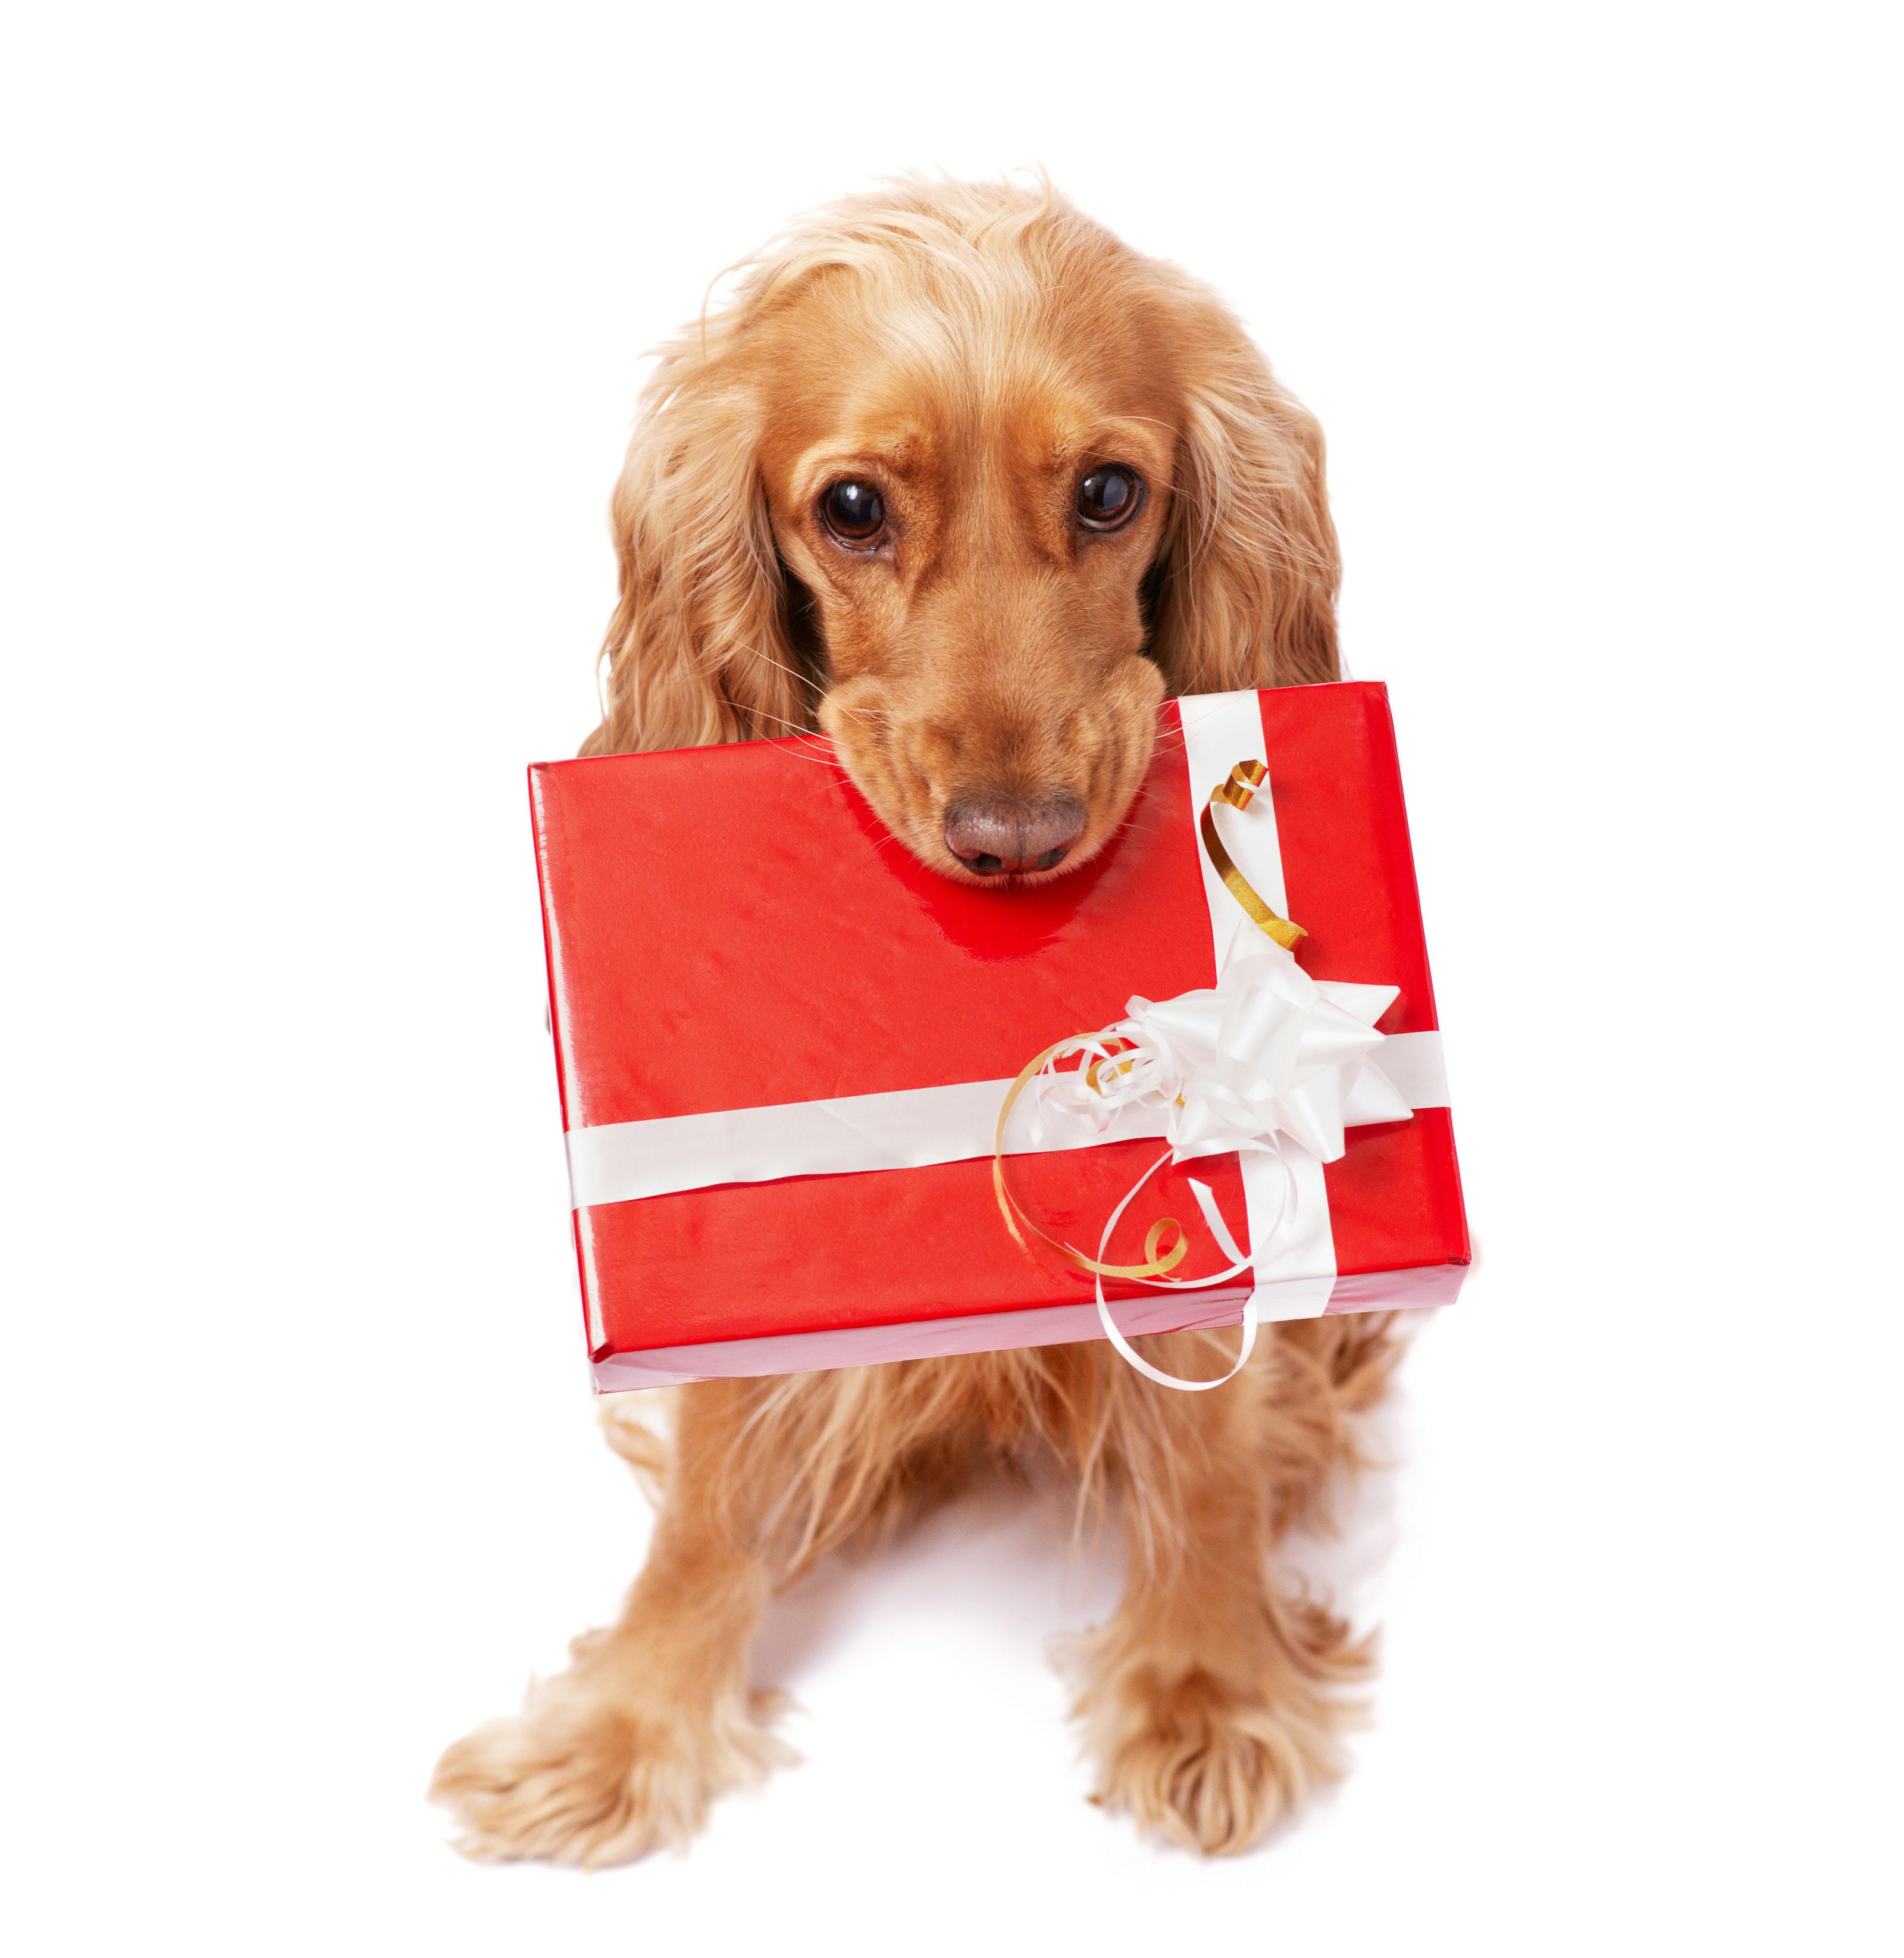 The nice dog is holding a present with the bow